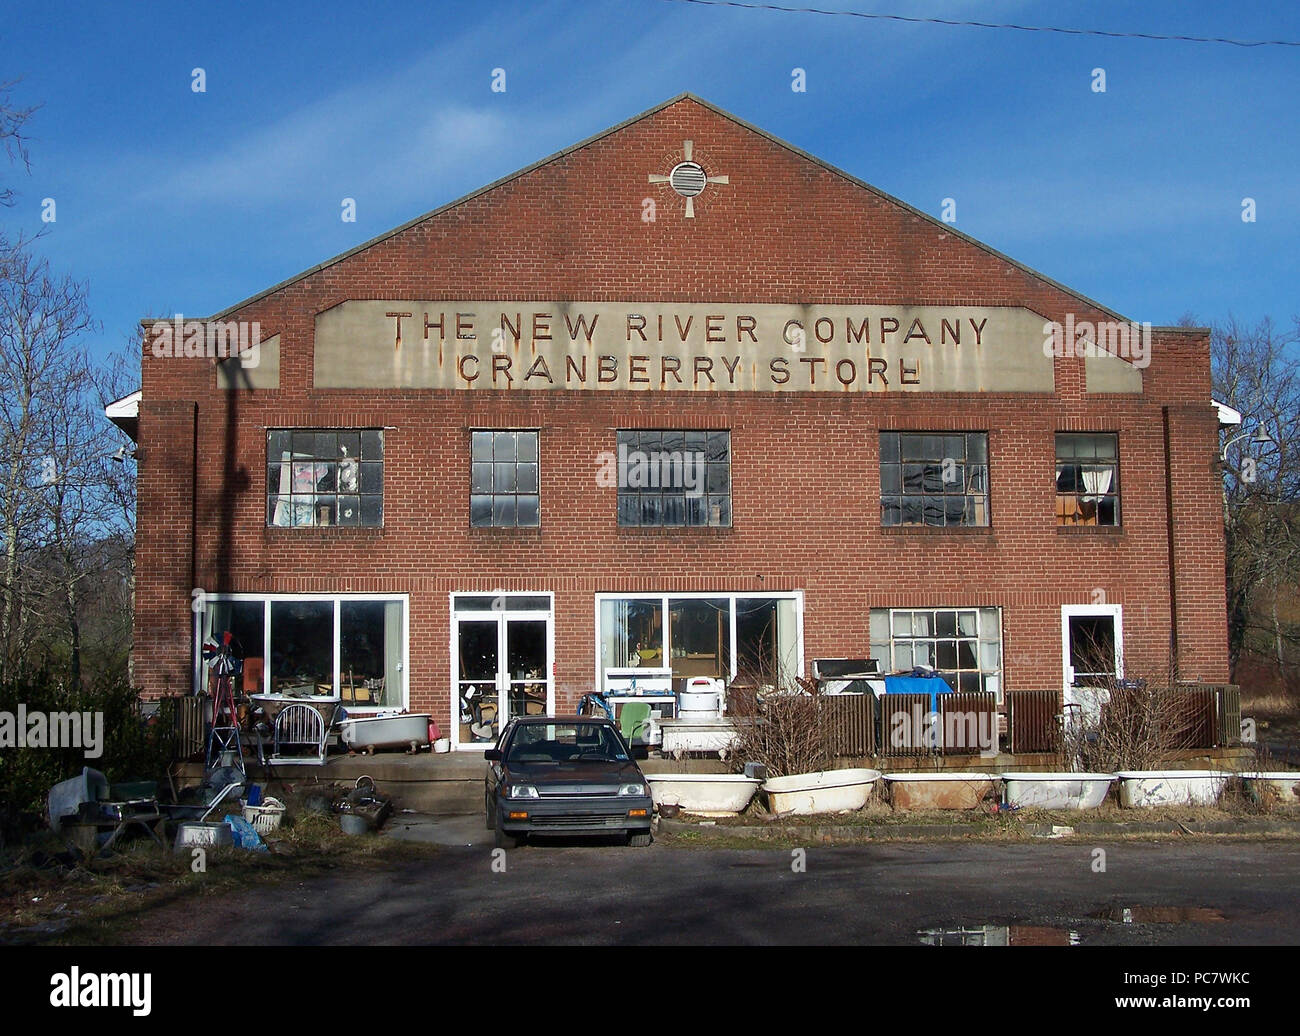 Constructed of brick with a stone lintel inscribed with 'New River Company Cranberry Store,' the building has fallen upon hard times, as witnessed by the numerous bathtubs and radiators positioned on the porch and in front of the building, as well as piles of unknown materials inside. Stock Photo